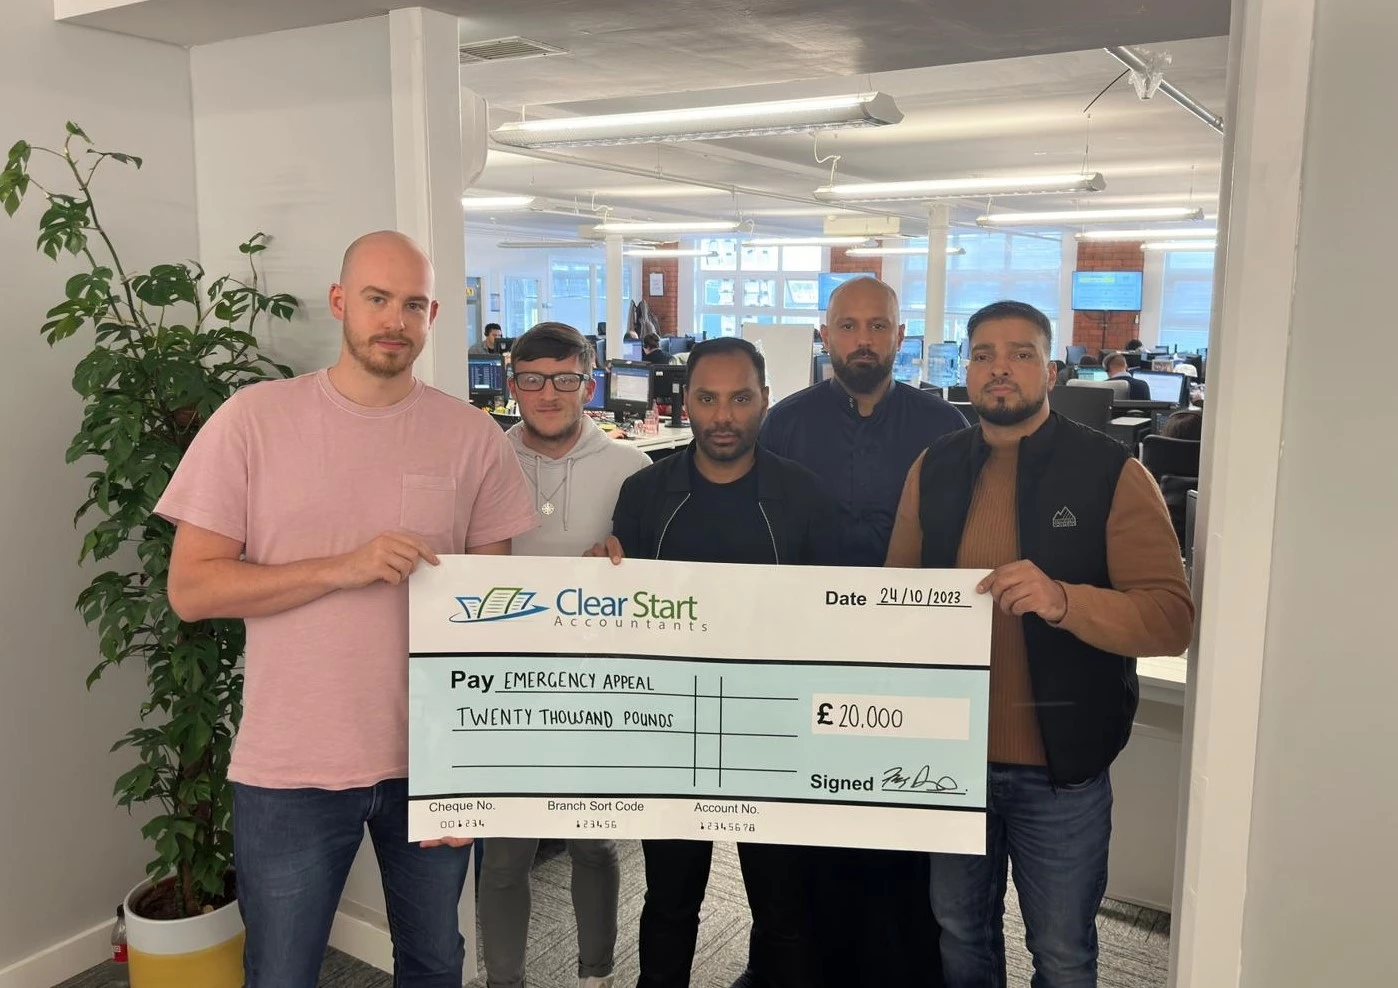 Clear Start Accountants CEO Fiaz Ashraf (second from right), pictured with Mohammed Abubakar, Chairman and Trustee of Smile Aid (far right)